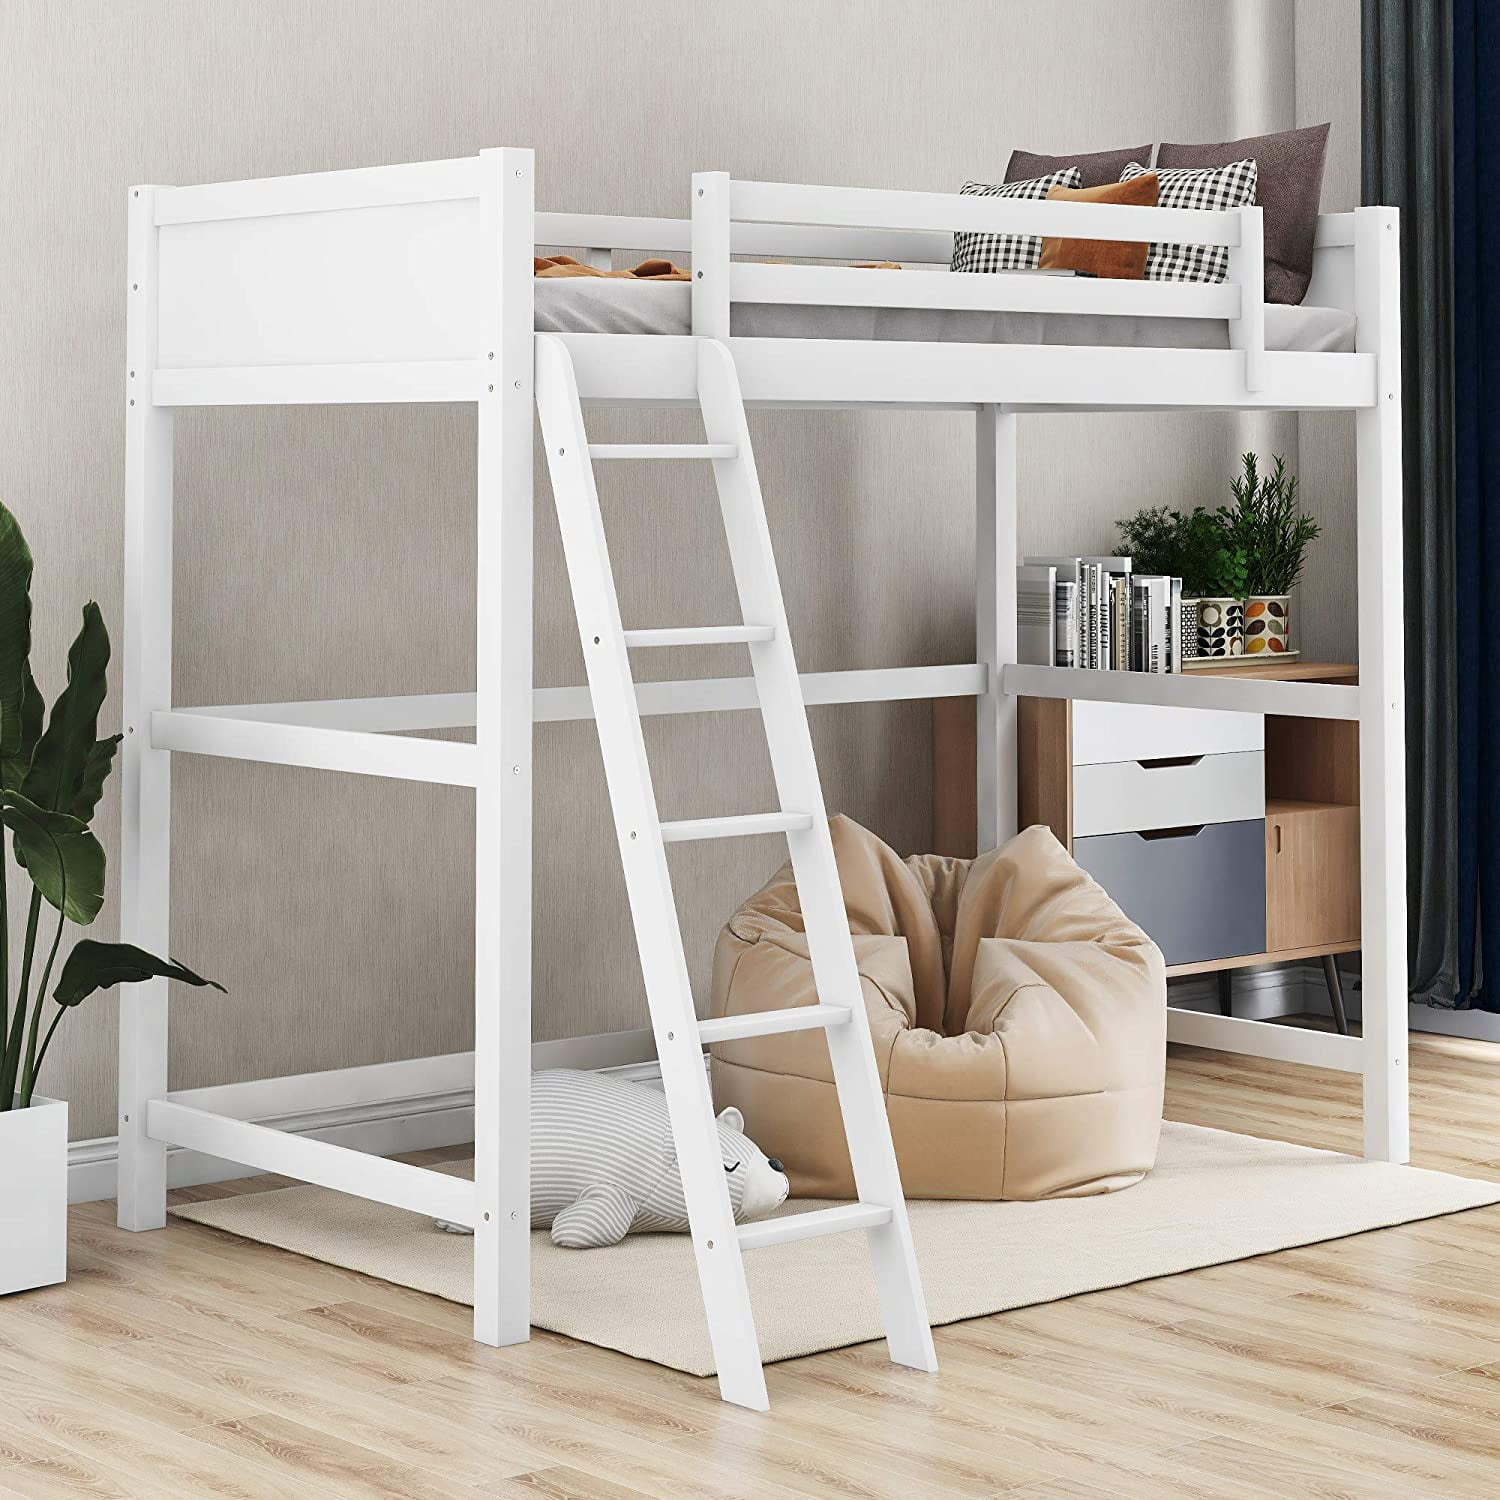 Modernluxe Panel Style Solid Wood Loft, How To Make A Wooden Ladder For Bunk Bed